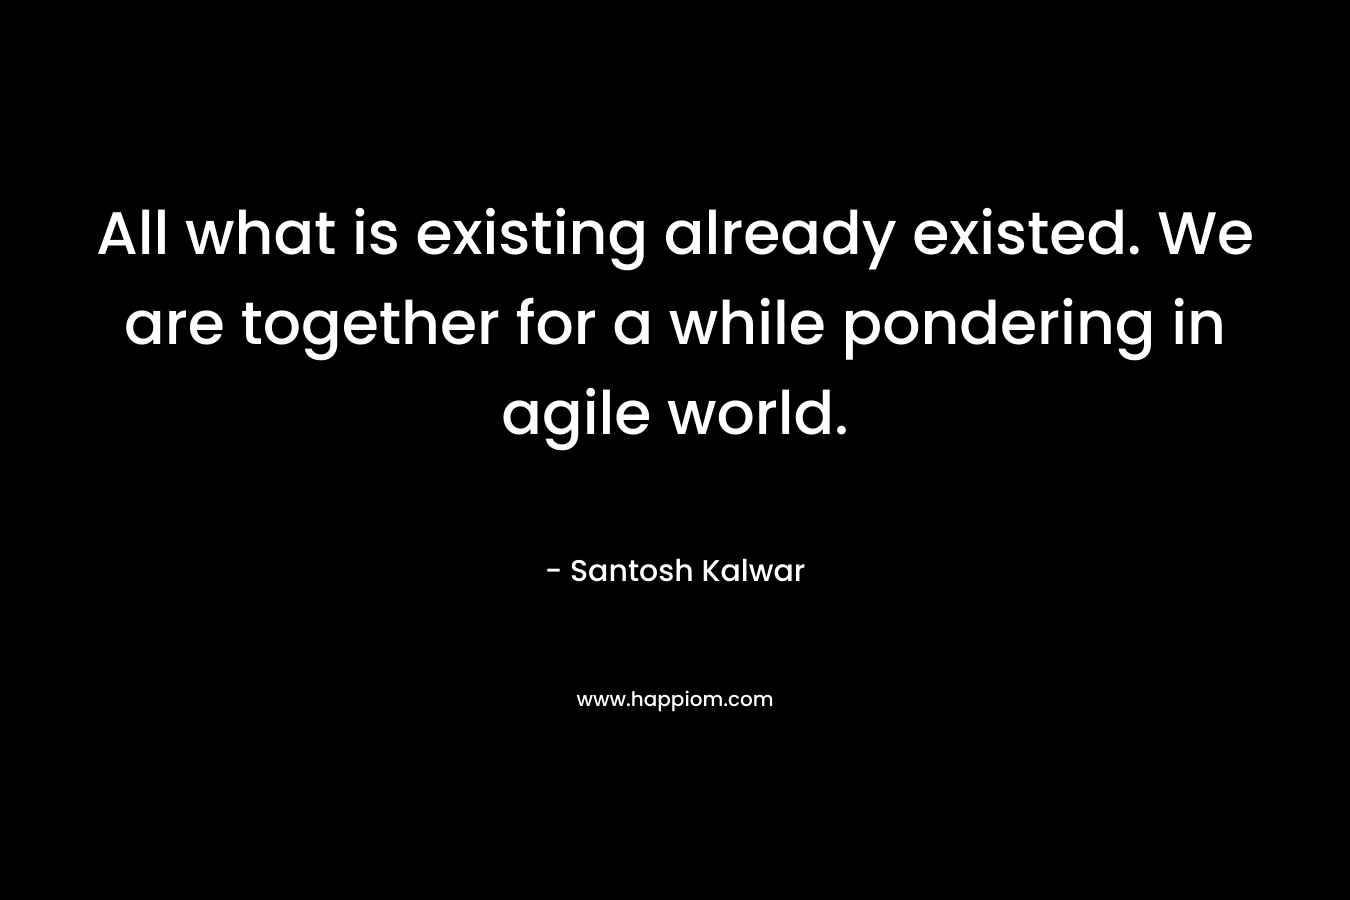 All what is existing already existed. We are together for a while pondering in agile world.